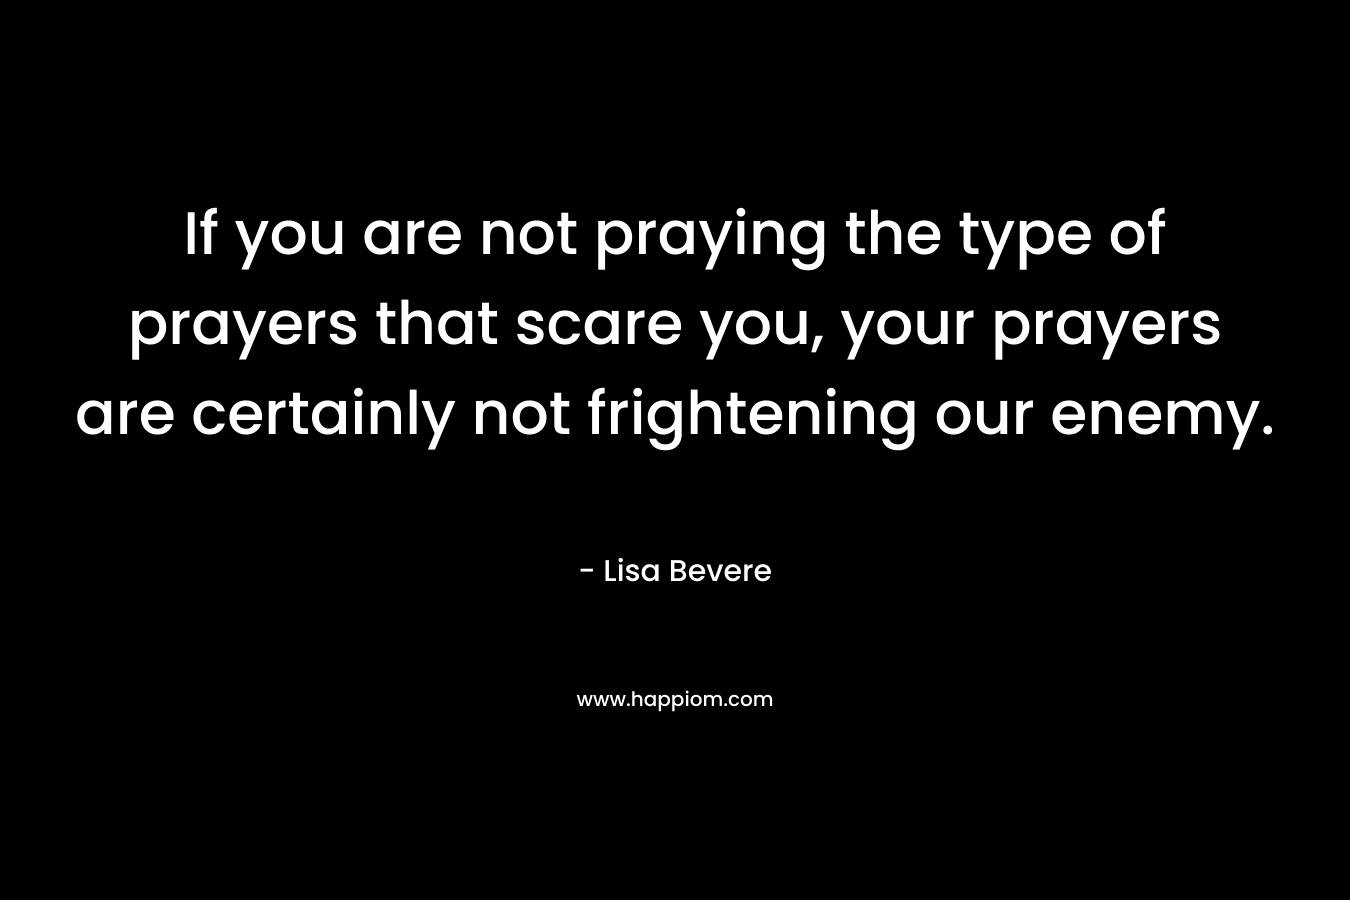 If you are not praying the type of prayers that scare you, your prayers are certainly not frightening our enemy. – Lisa Bevere